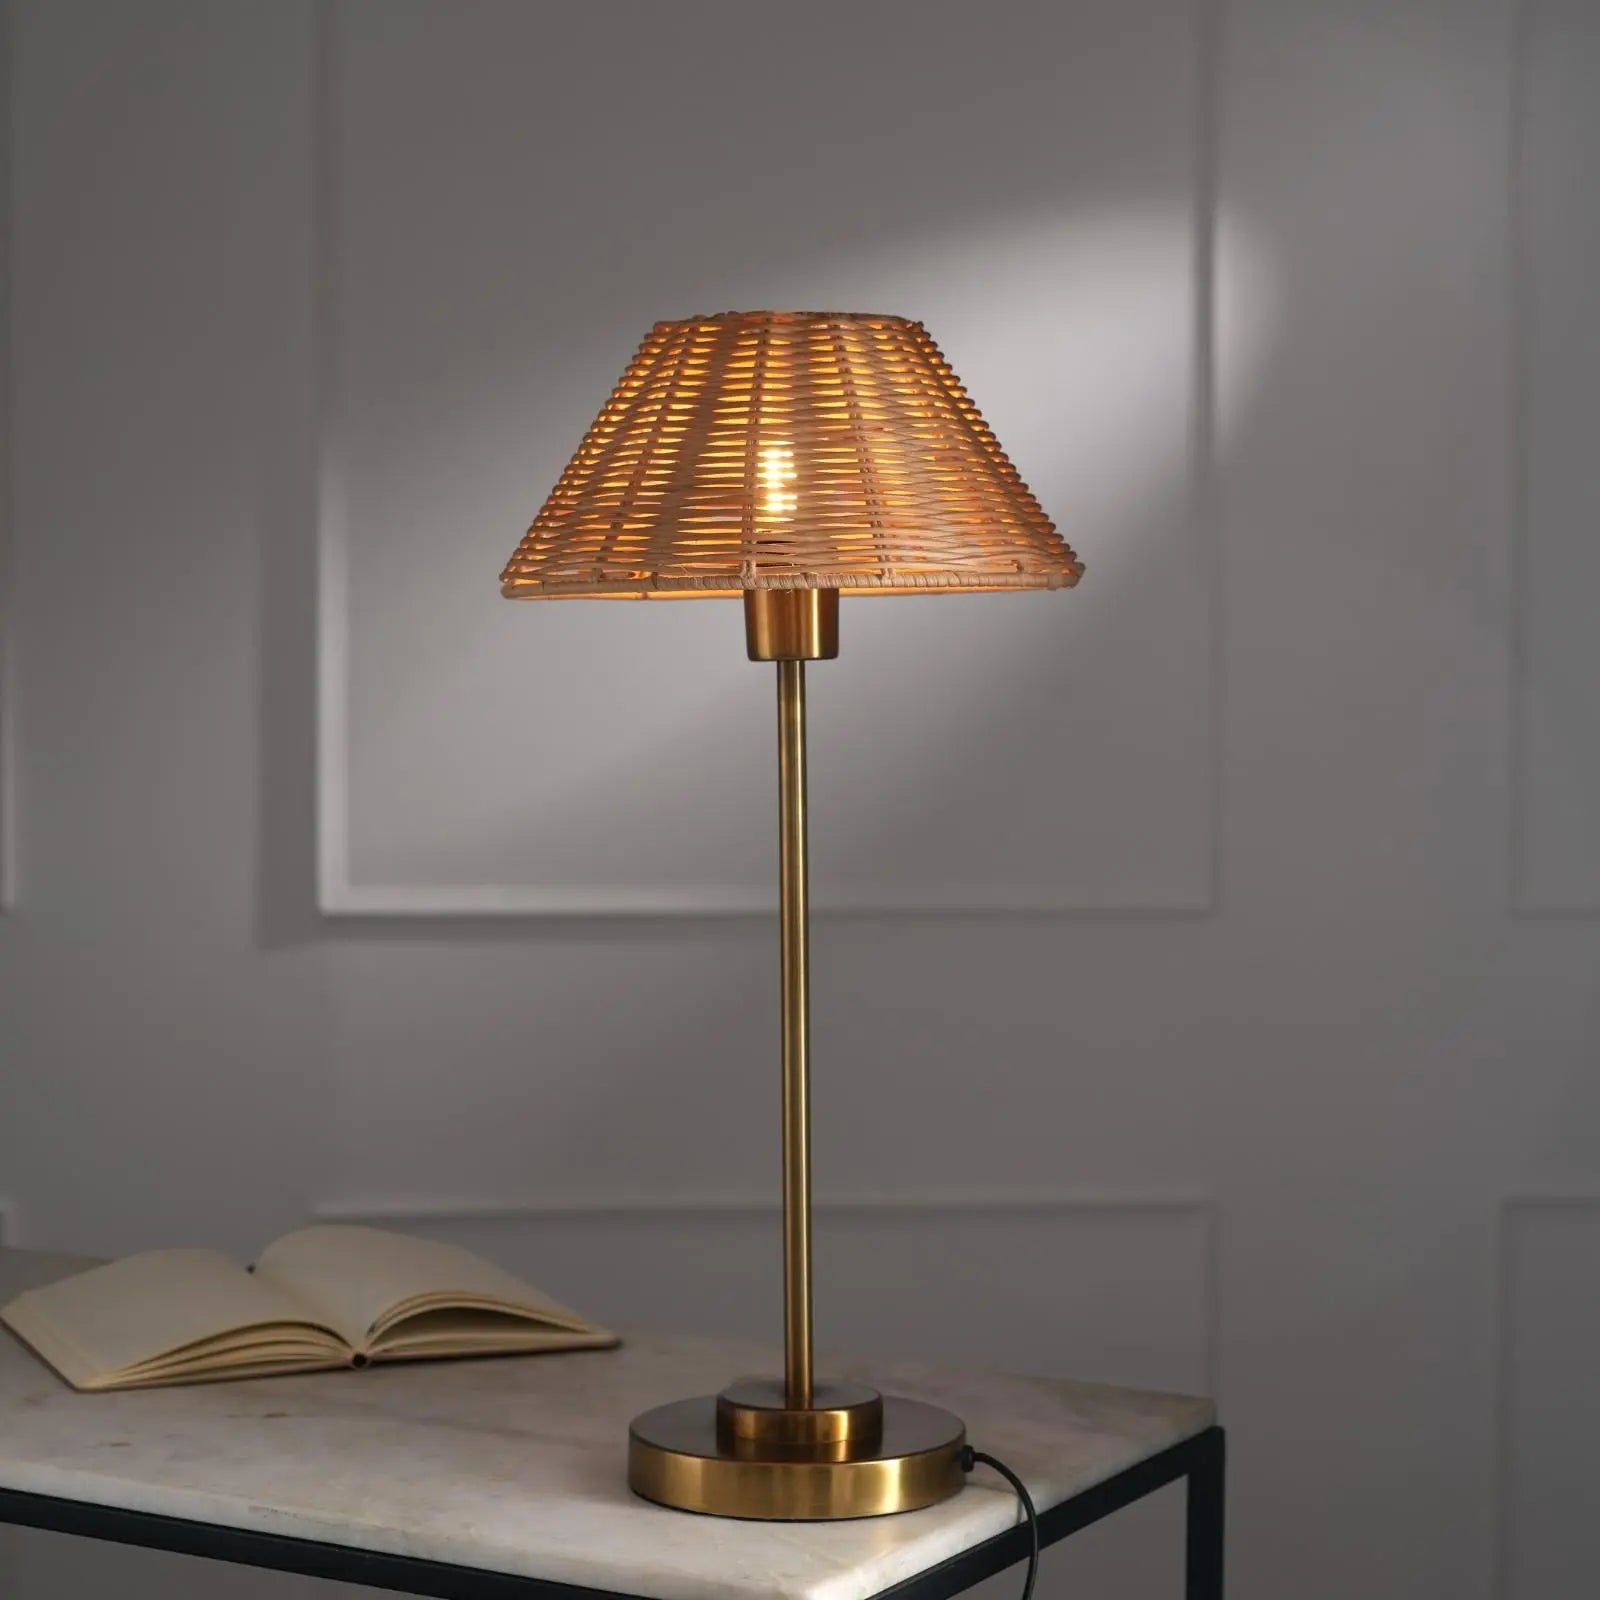 Natural Cane Lamp - Made from Rattan, Handweaving, Antique Finish of Base